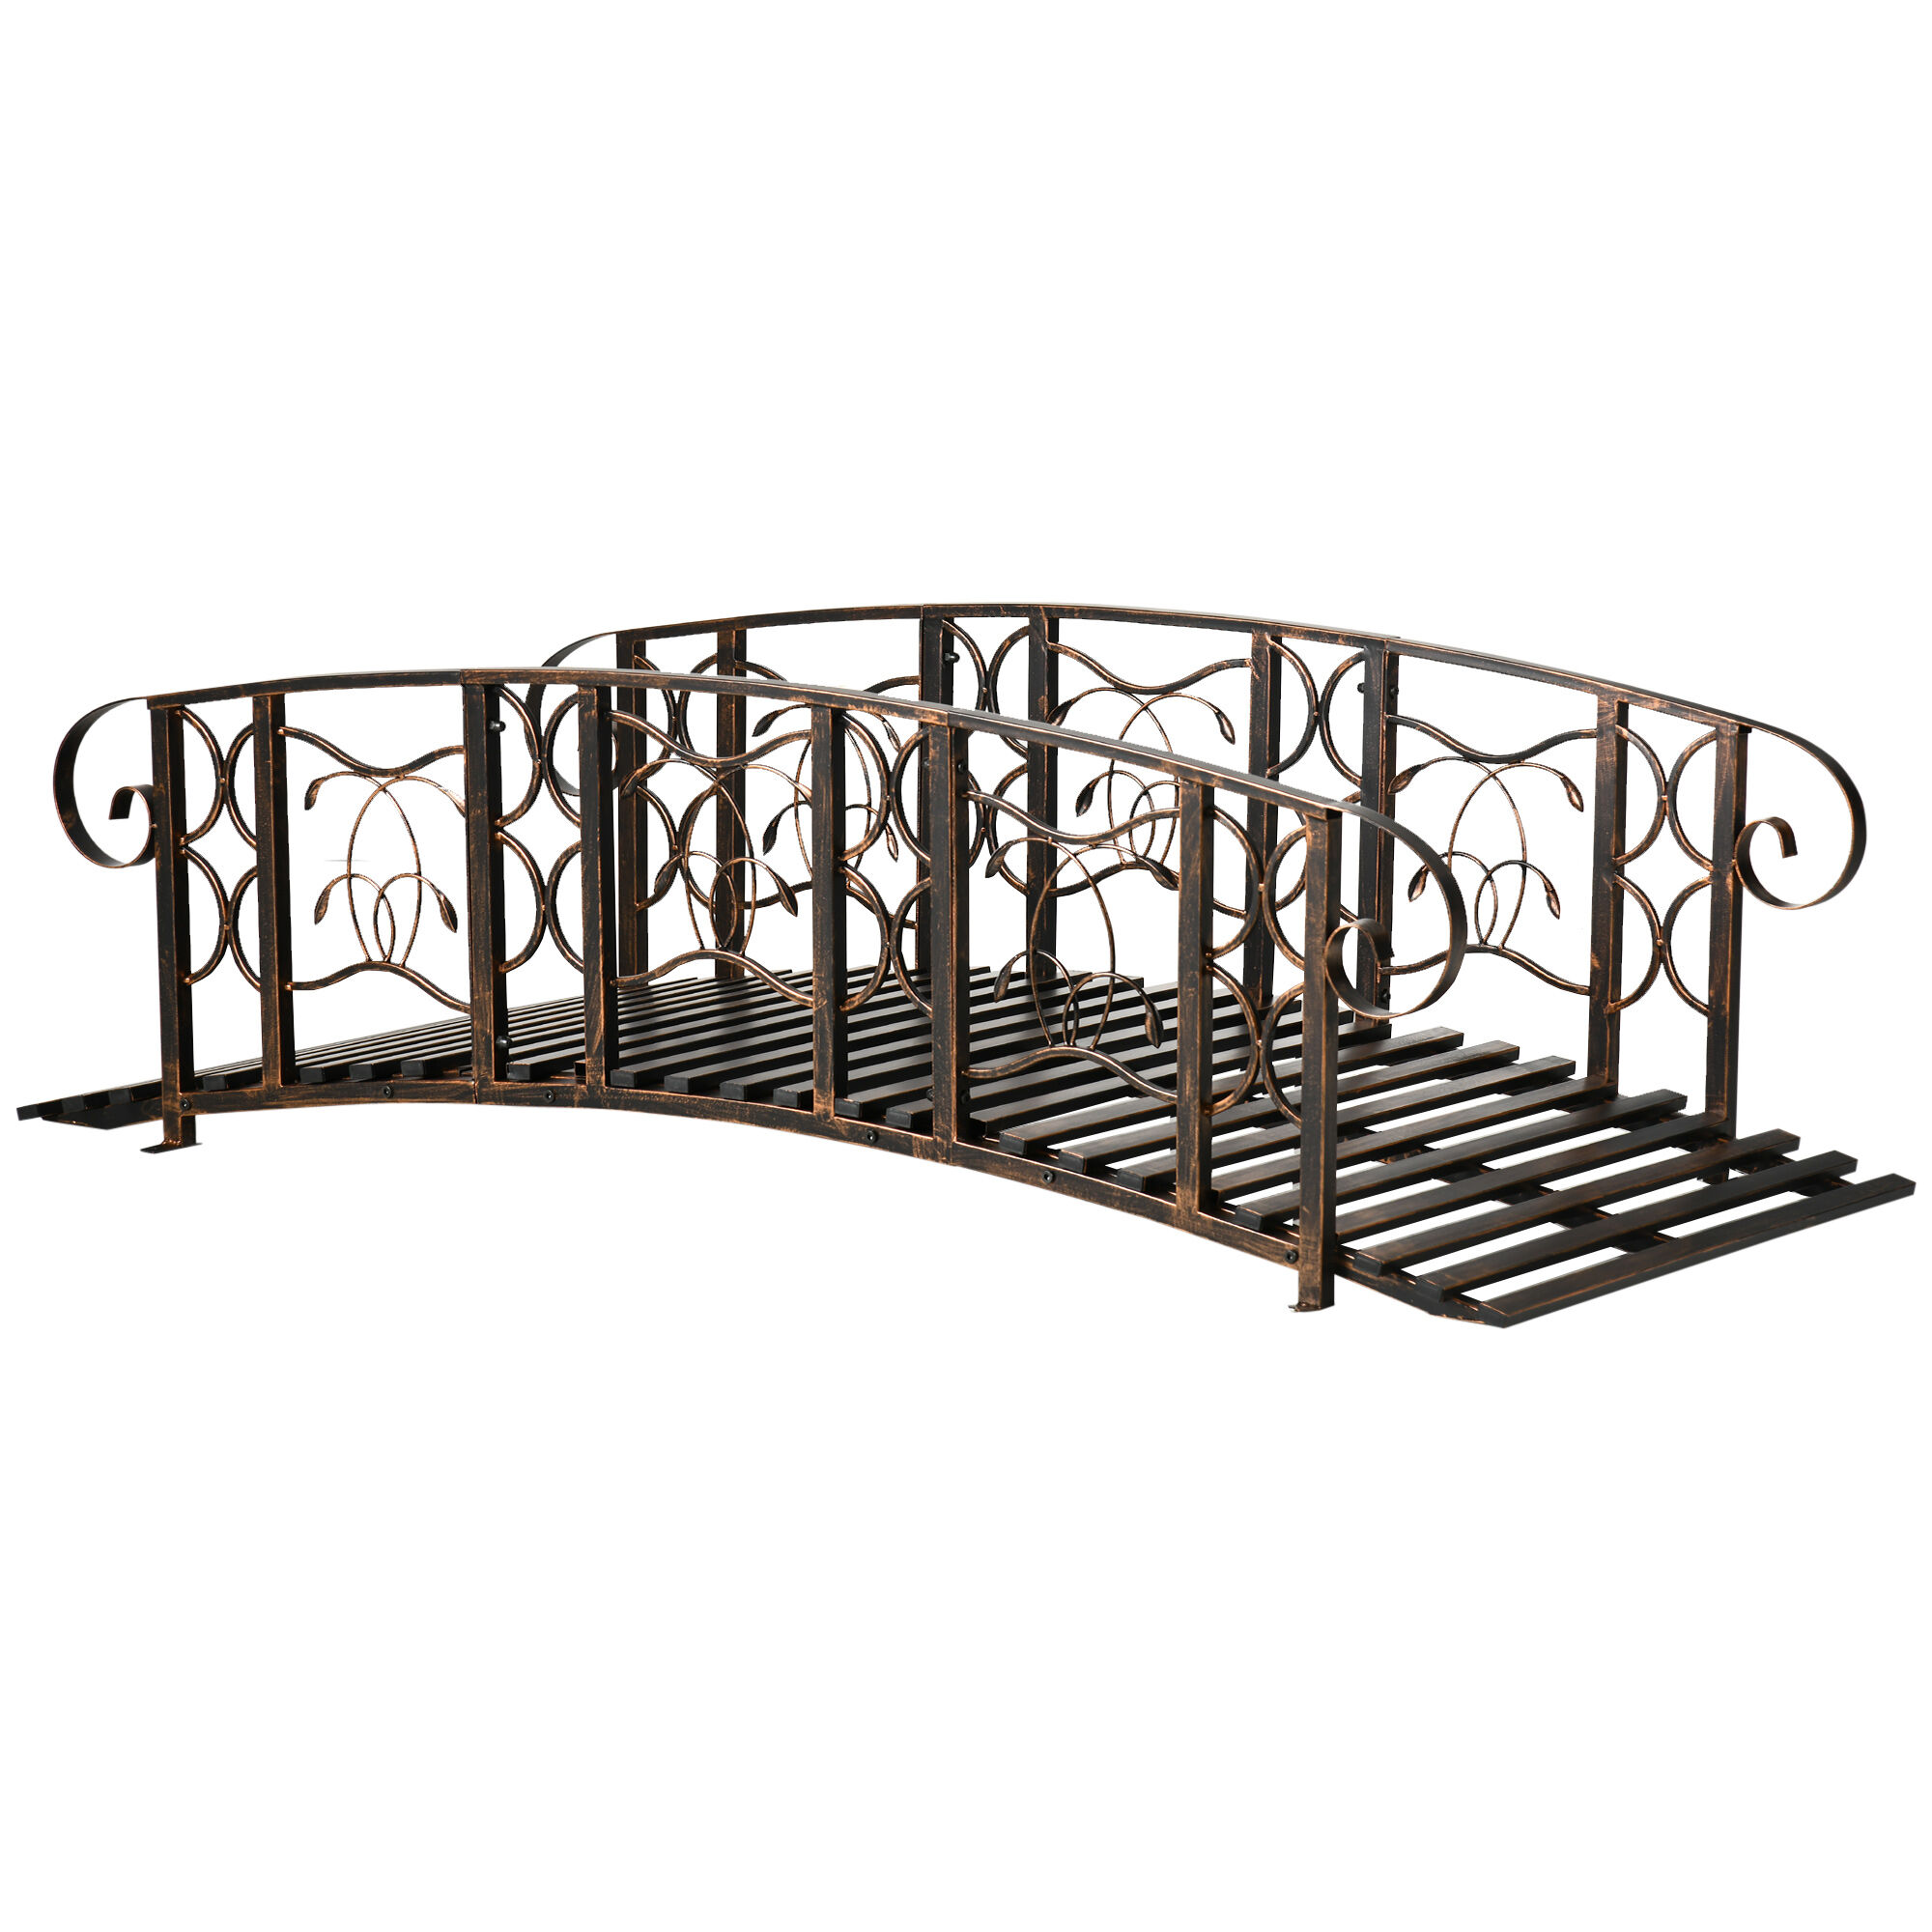 Outsunny 6' Metal Garden Bridge with Safety Siderails, Vine Motifs, Ourdoor Decorative Arch Bridge for Pond and Backyard Landscaping